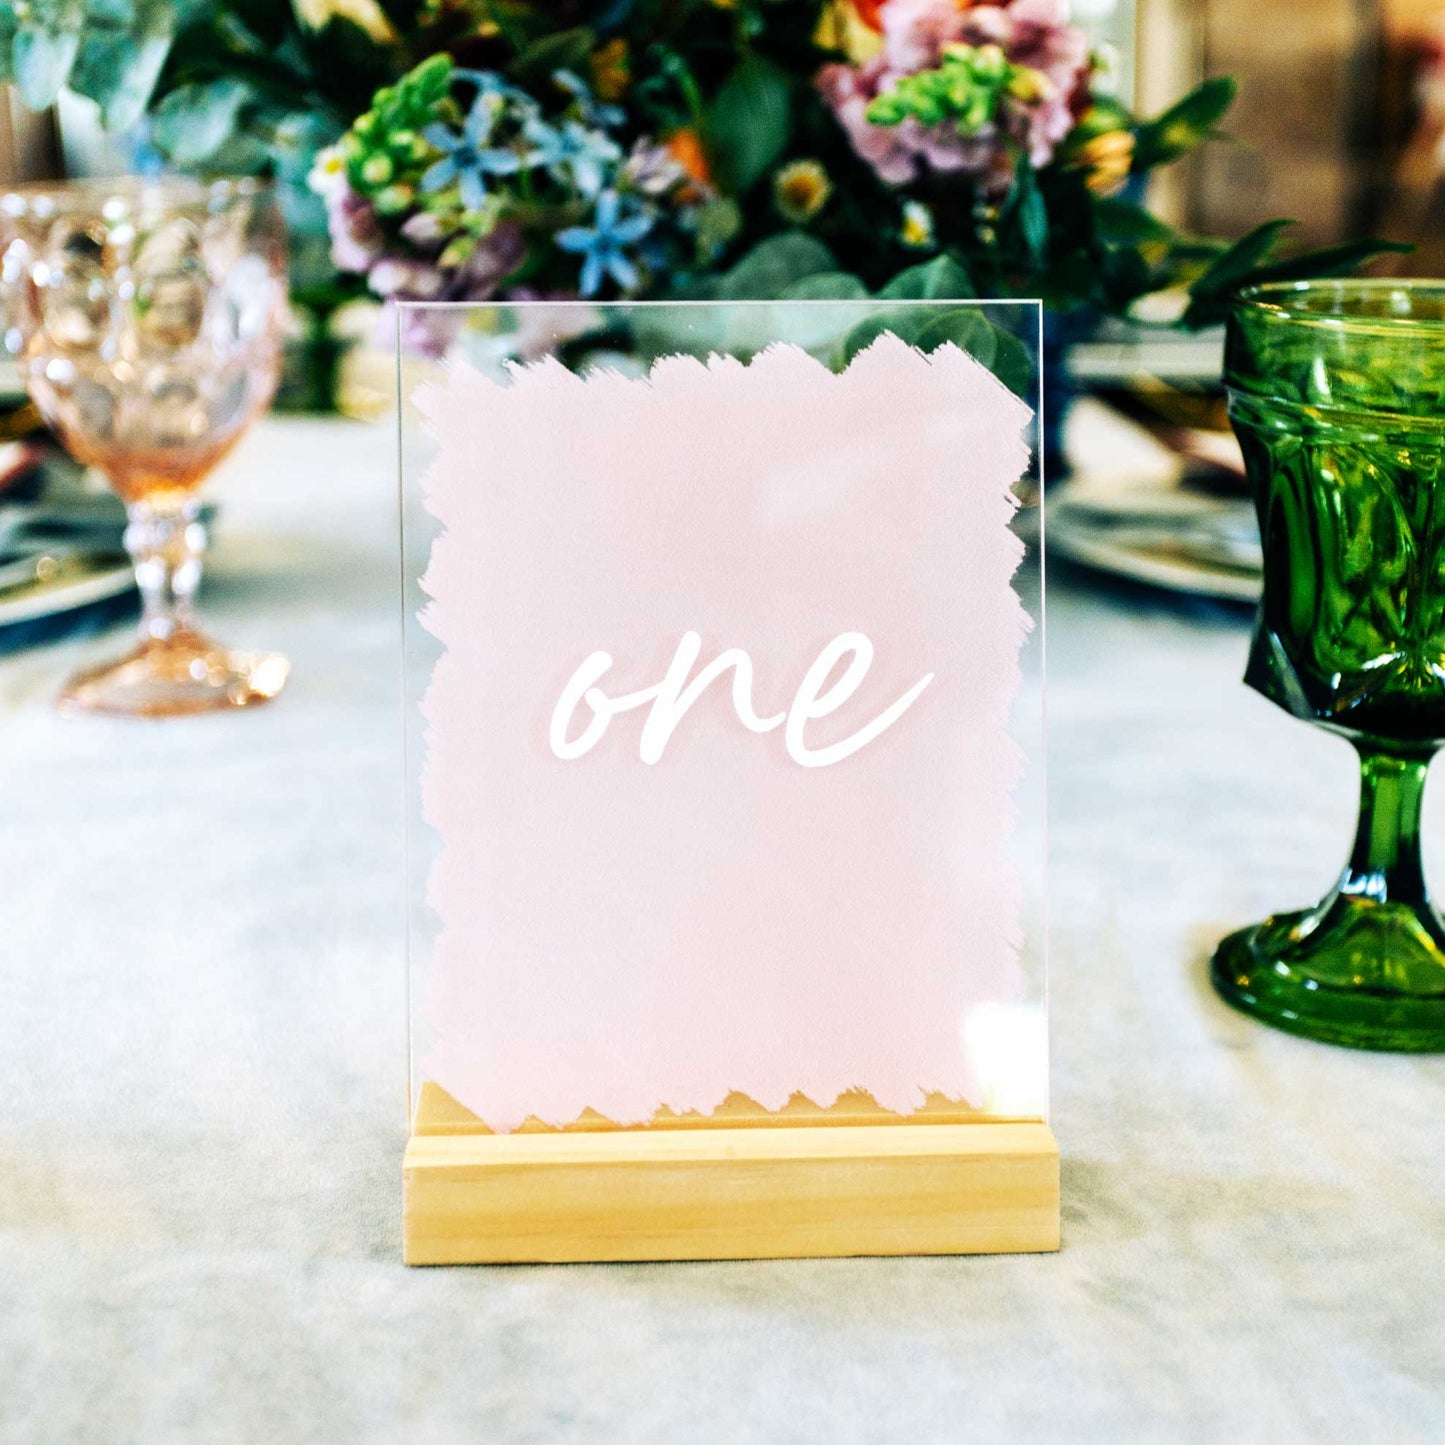 Acrylic Table Numbers for Wedding Table - Wedding Decor Gifts